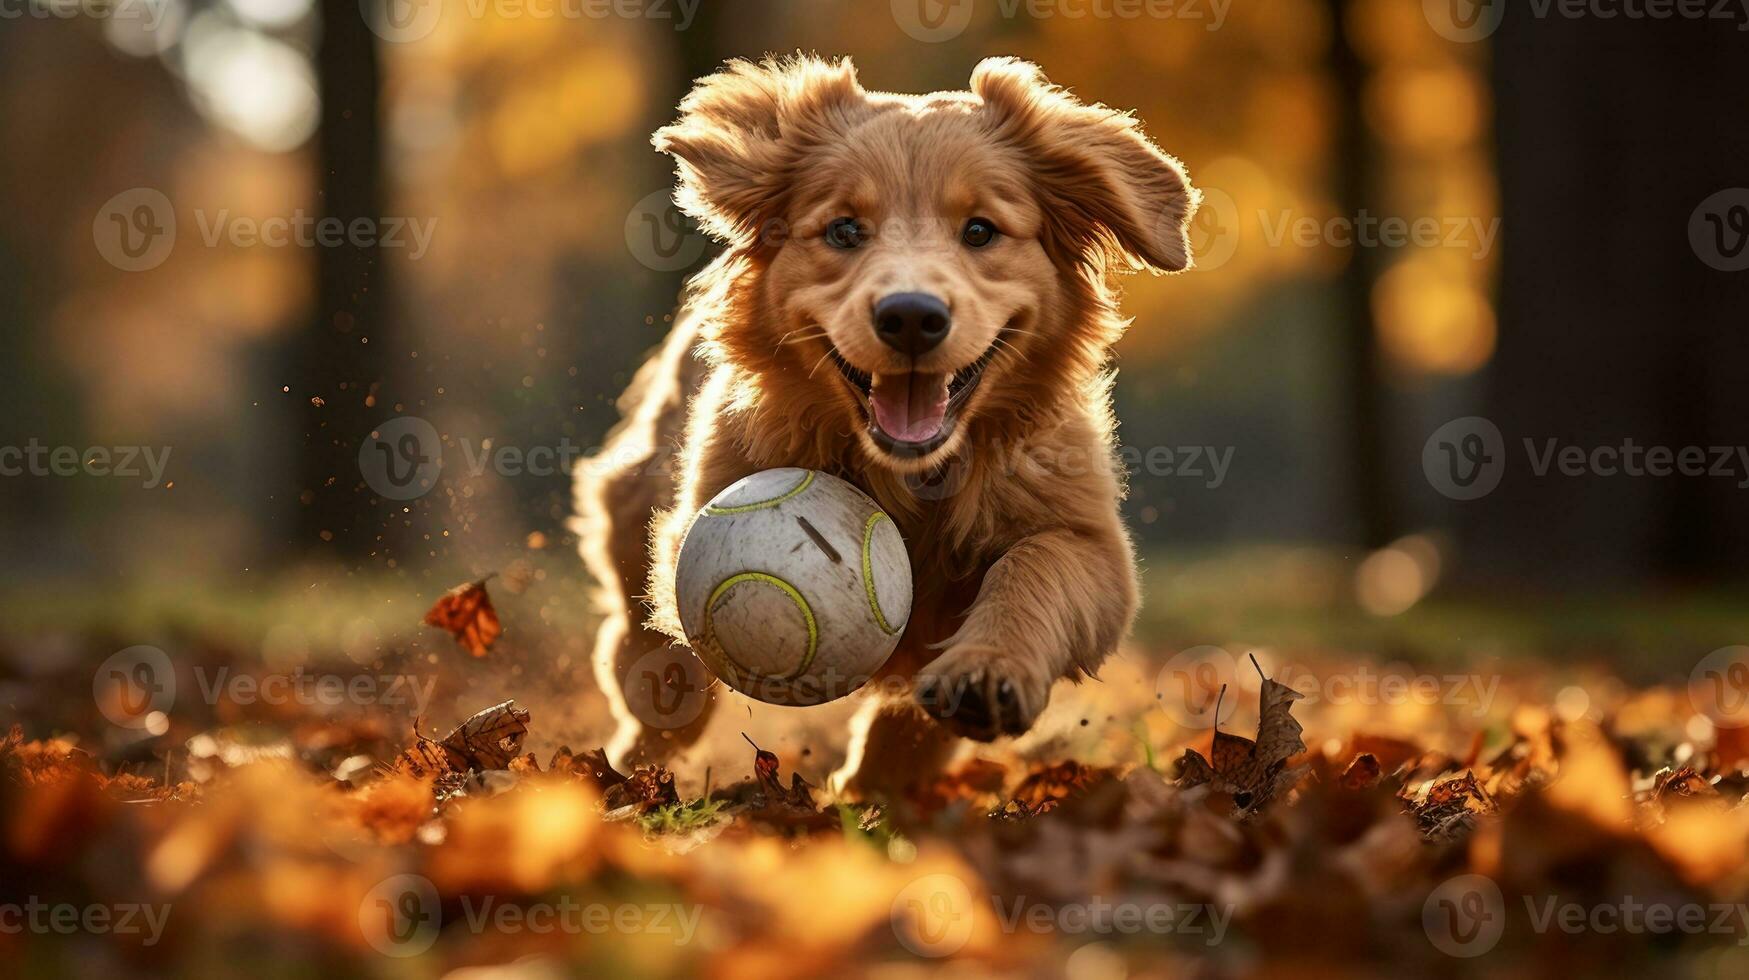 Dog plays with ball in autumn park photo